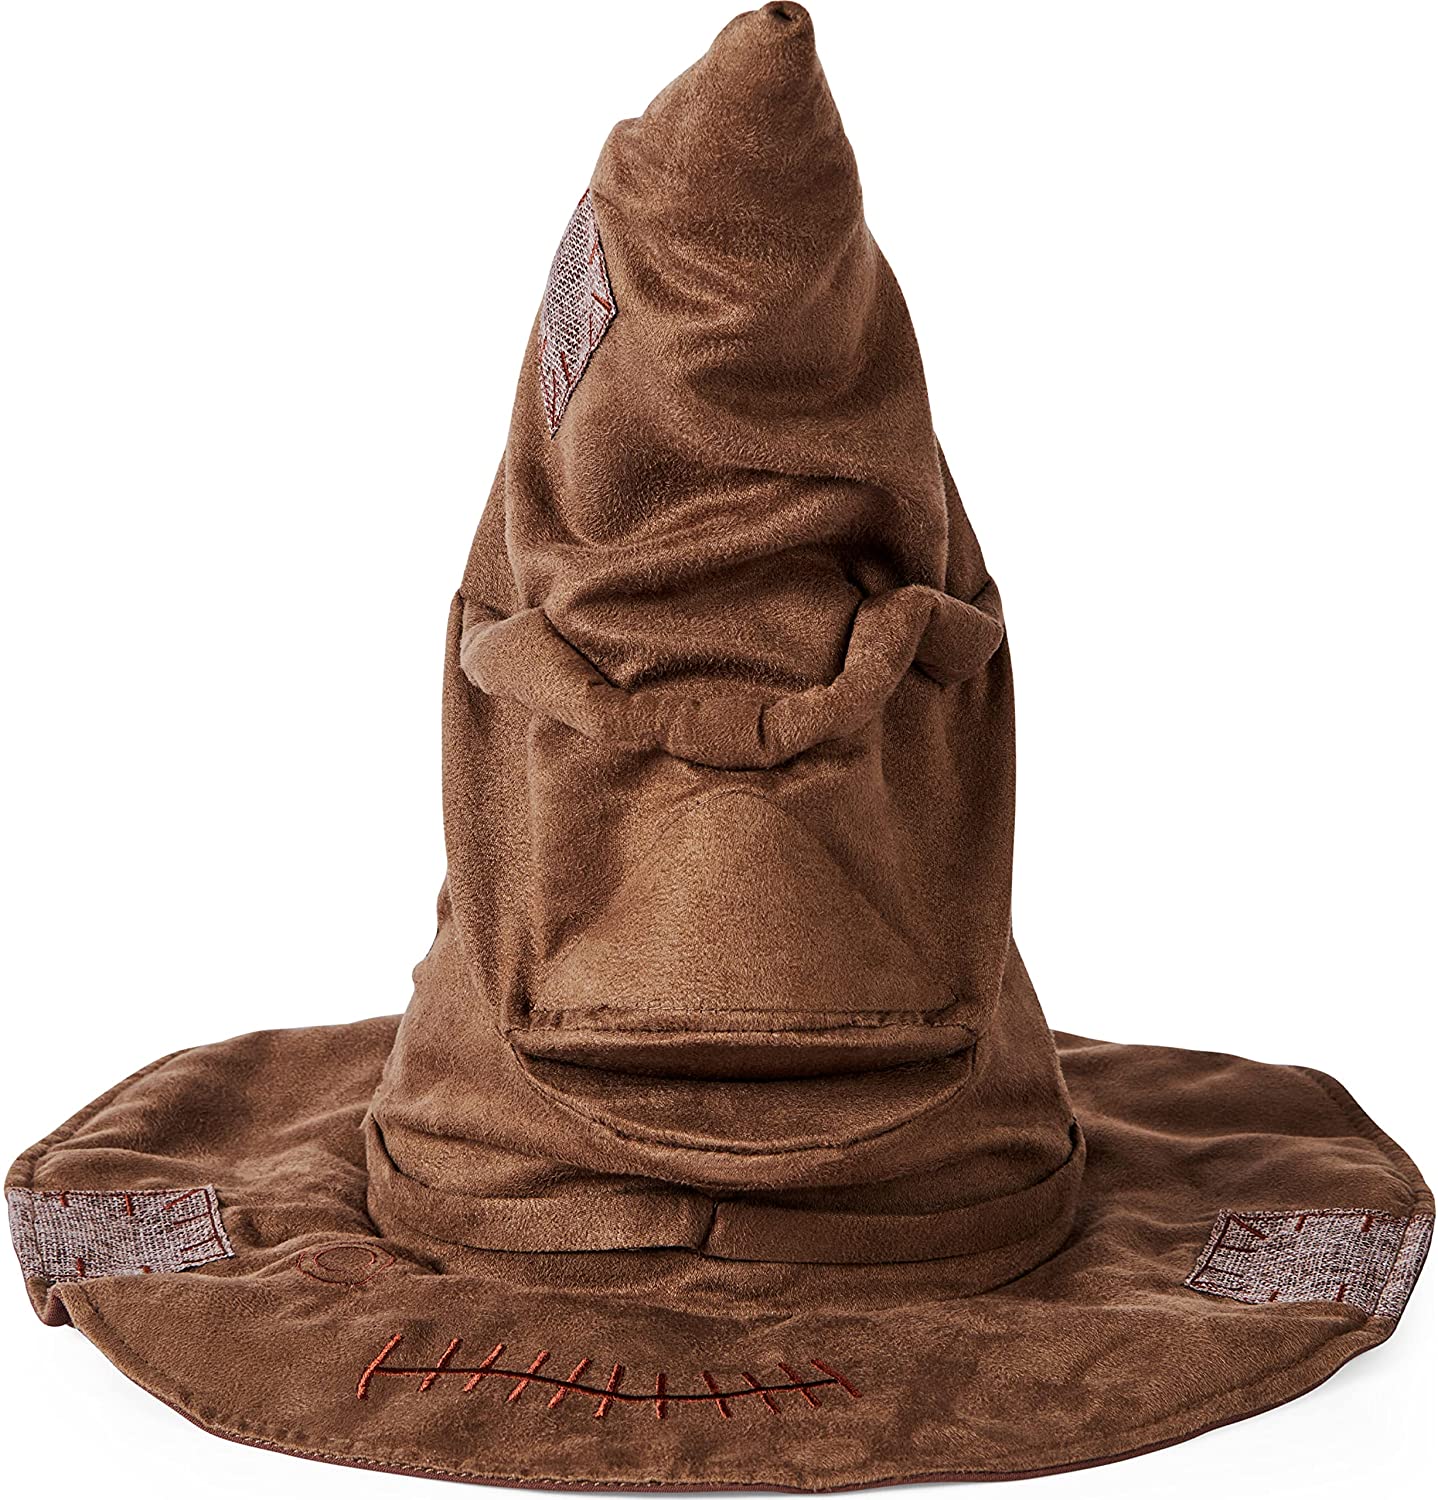 Wizarding World, Harry Potter Interactive Sorting Hat, 15 phrases with real voice from the movie, the mouth moves